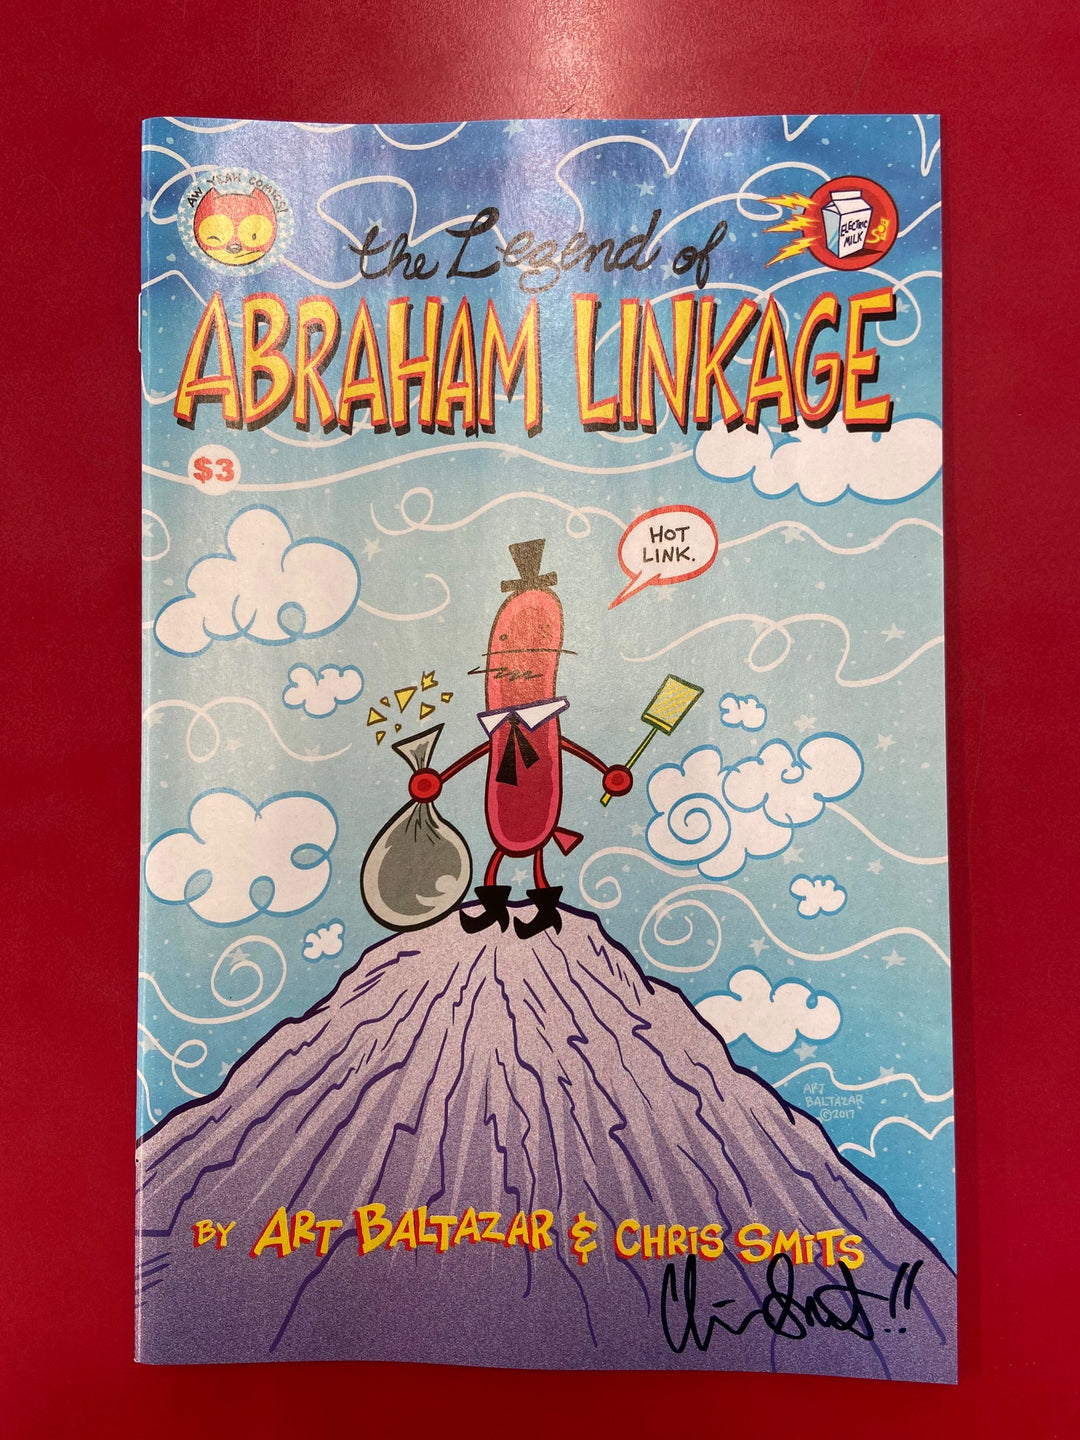 The Legend of Abraham Linkage #1